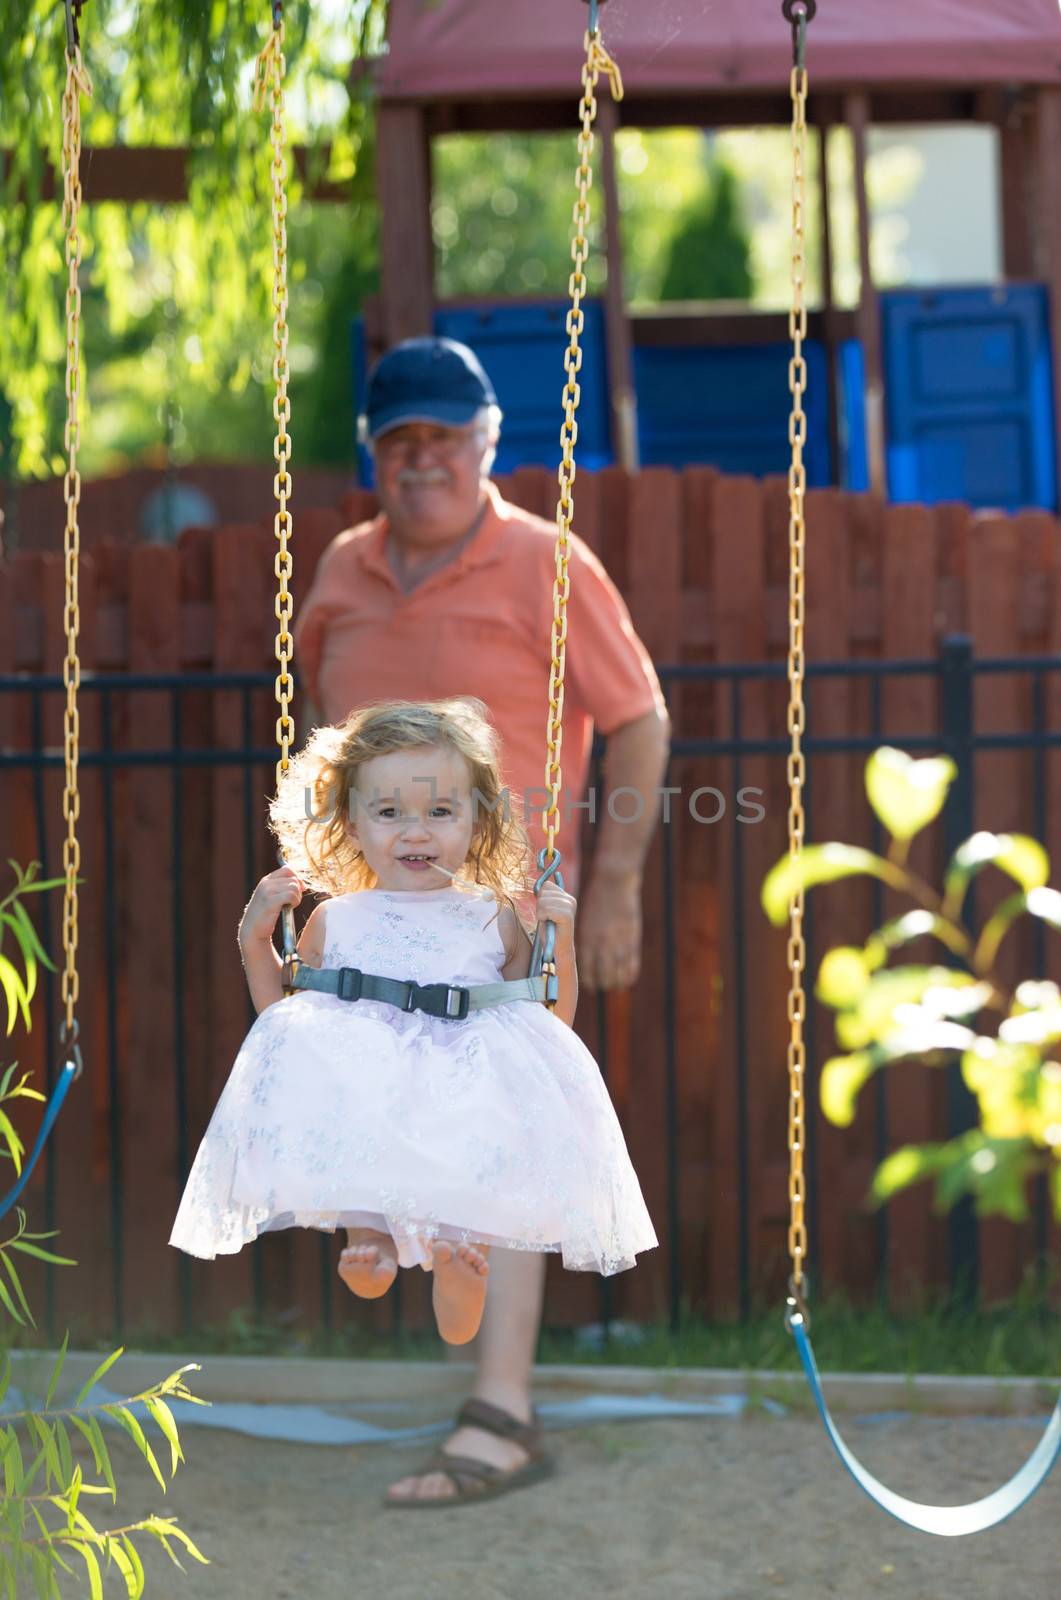 Toddler Girl on the Swing pushed by her Grandfather by coskun